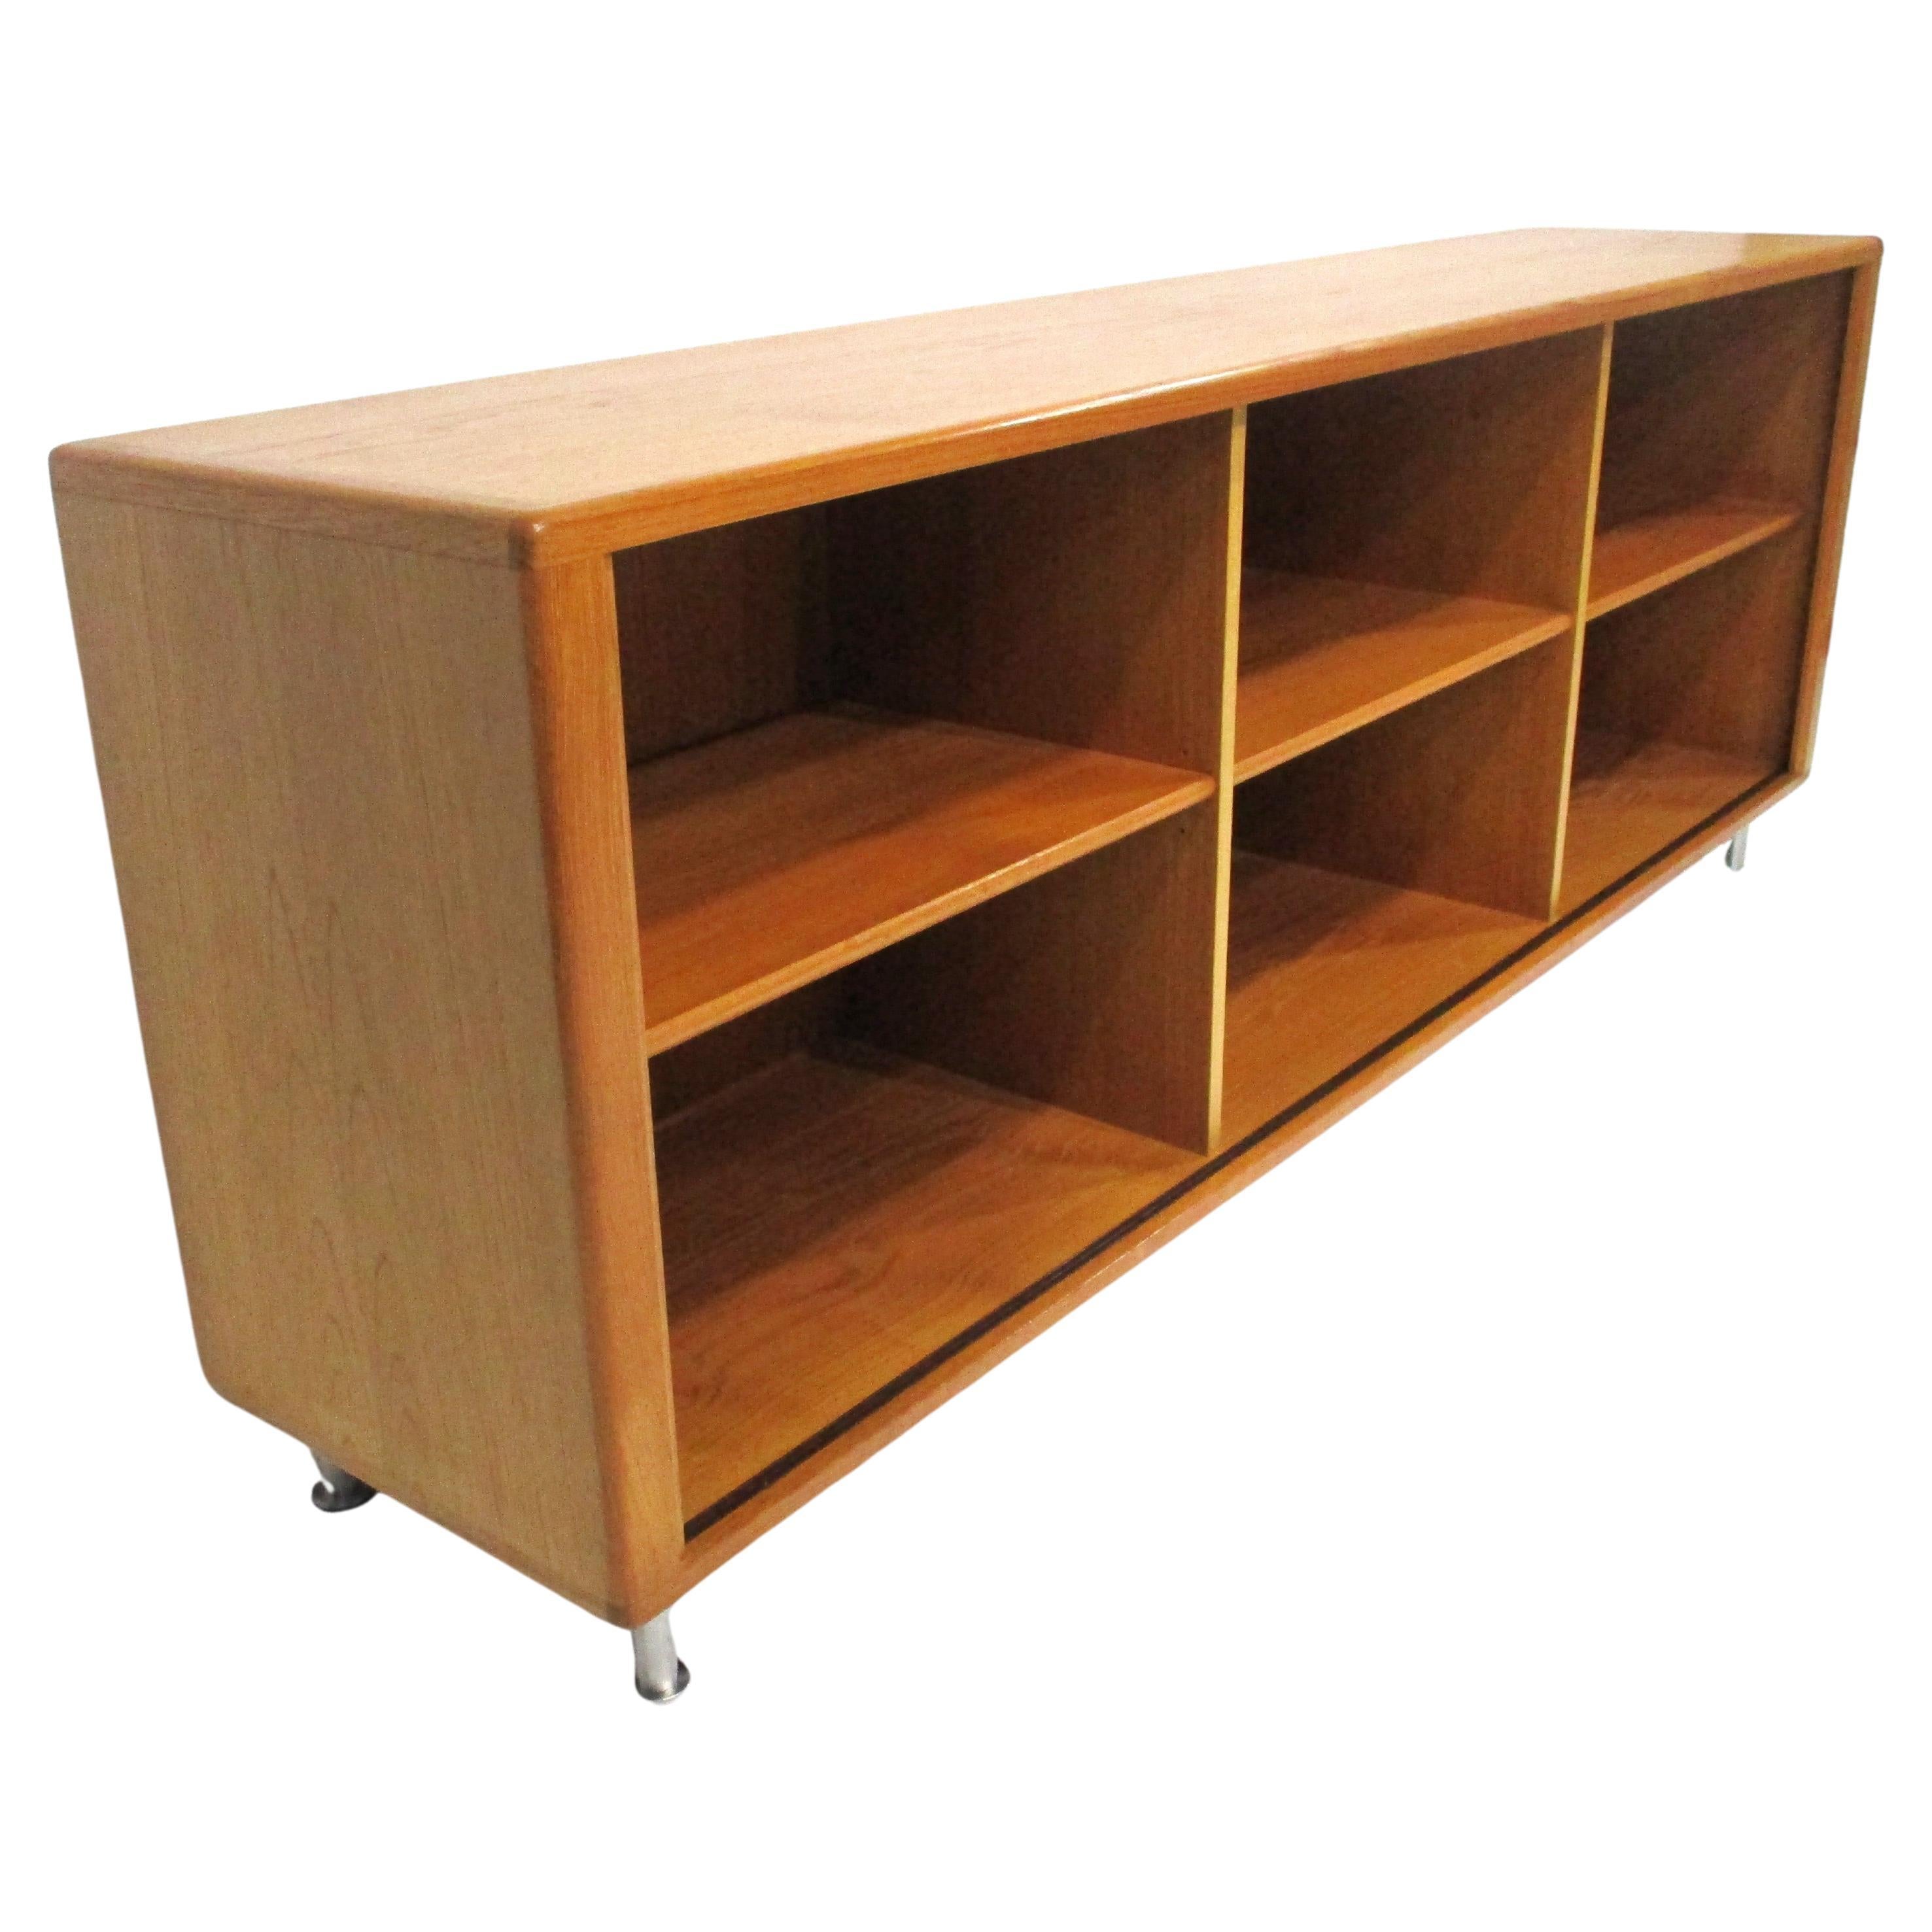 A medium toned teak wood bookcase with adjustable shelves sitting on brushed aluminum legs . Three sections with one shelve each gives you plenty of storage for books or vinyl records with legs that are adjustable and have pads to protect your